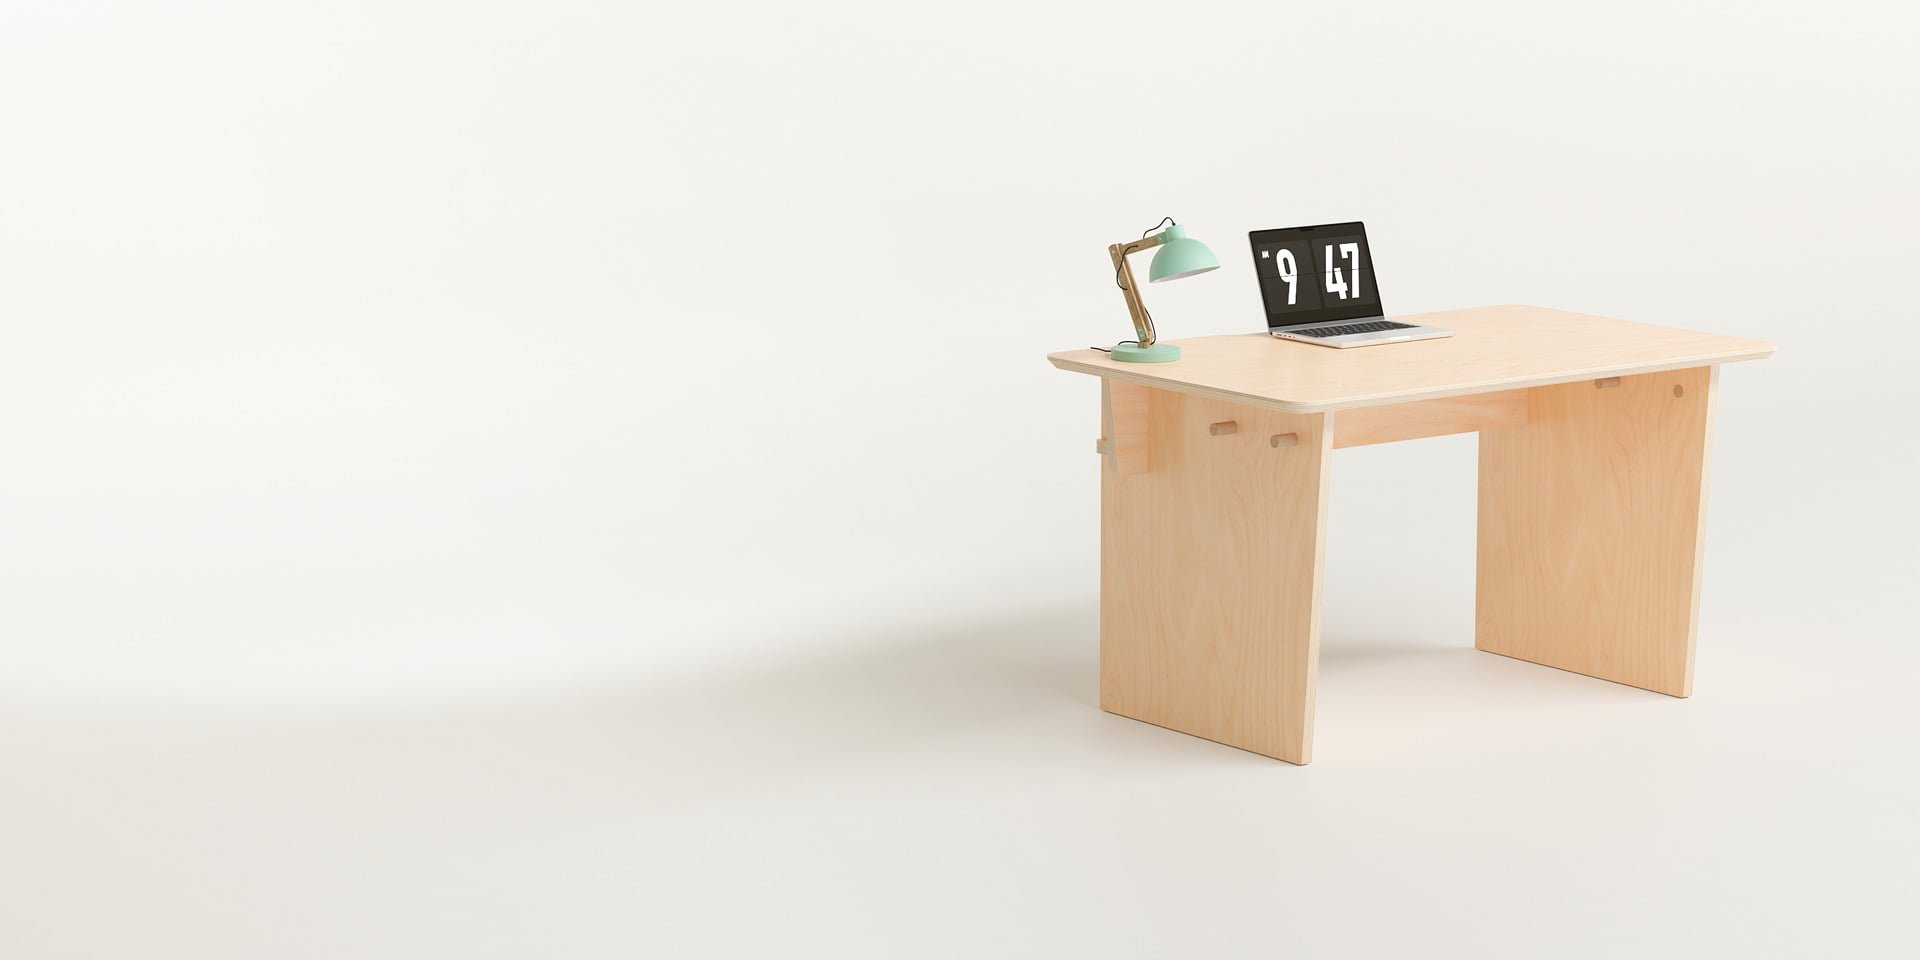 The Ecosium Stubby desk made from sustainable timber in Australia sitting on a white background with a green desk lamp and an Apple laptop